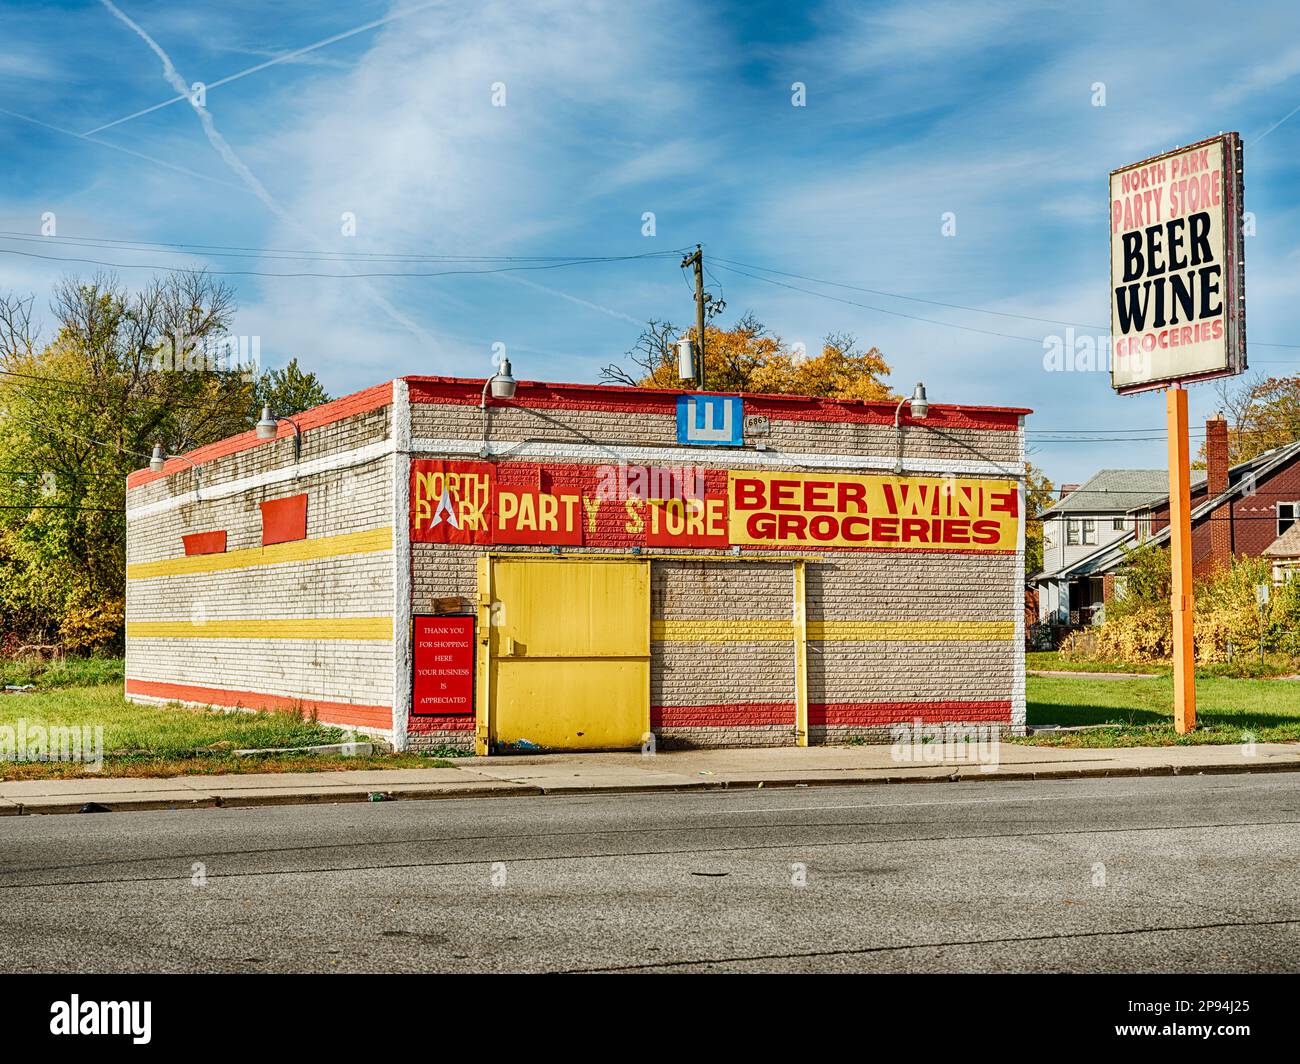 DETROIT, MICHIGAN - OCTOBER 20, 2020: A small store on Hamilton Avenue provides beer, wine and other groceries to the local community of Highland Park Stock Photo